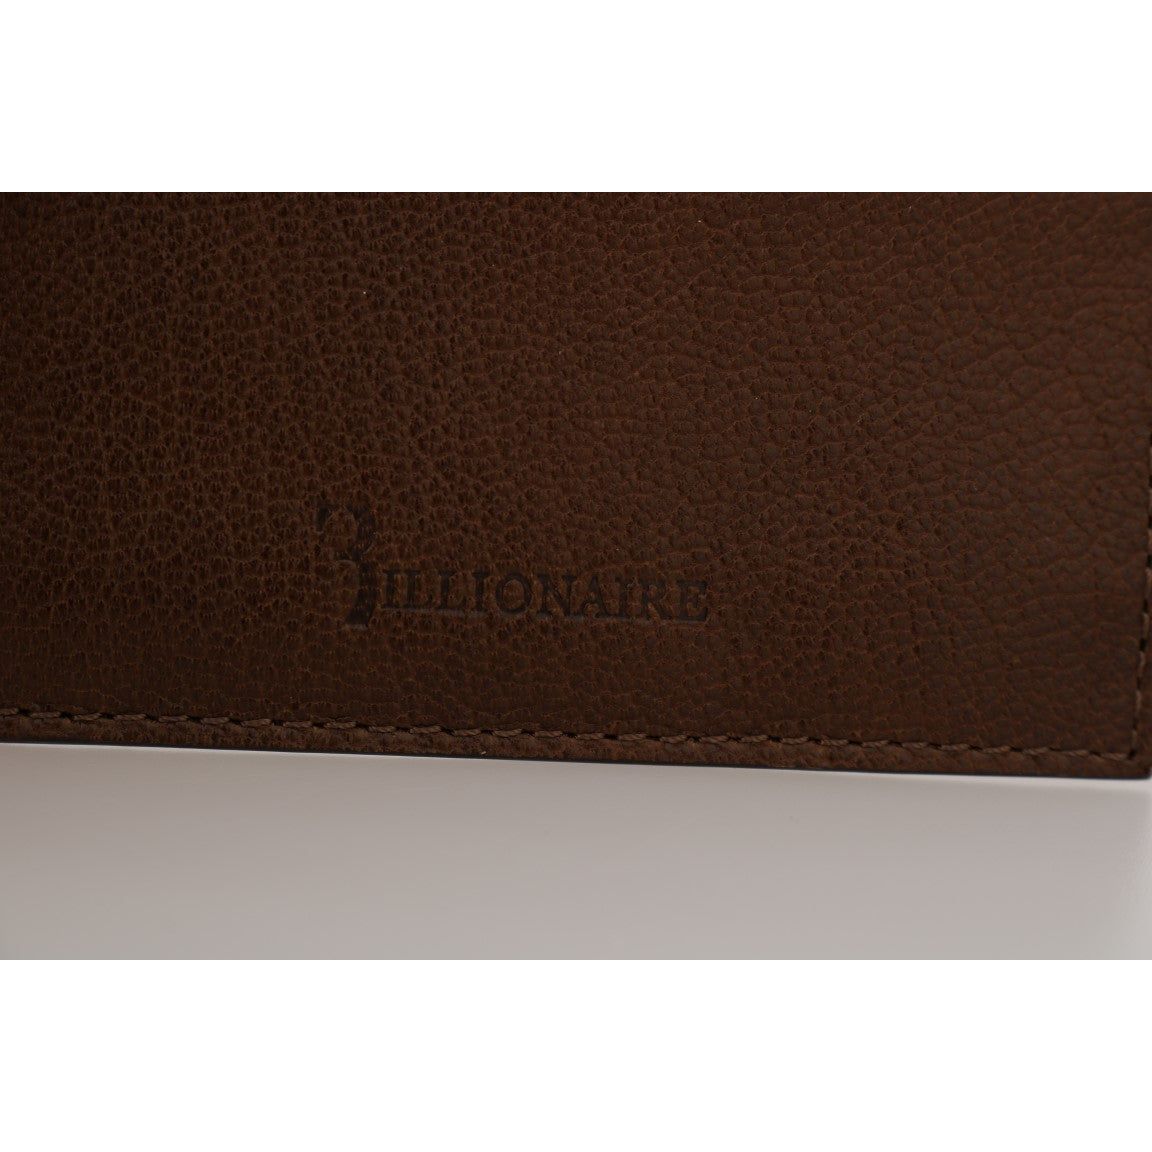 Billionaire Italian Couture Elegant Leather Men's Wallet in Brown brown-leather-cardholder-wallet Wallet 463442-brown-leather-cardholder-wallet-4.jpg